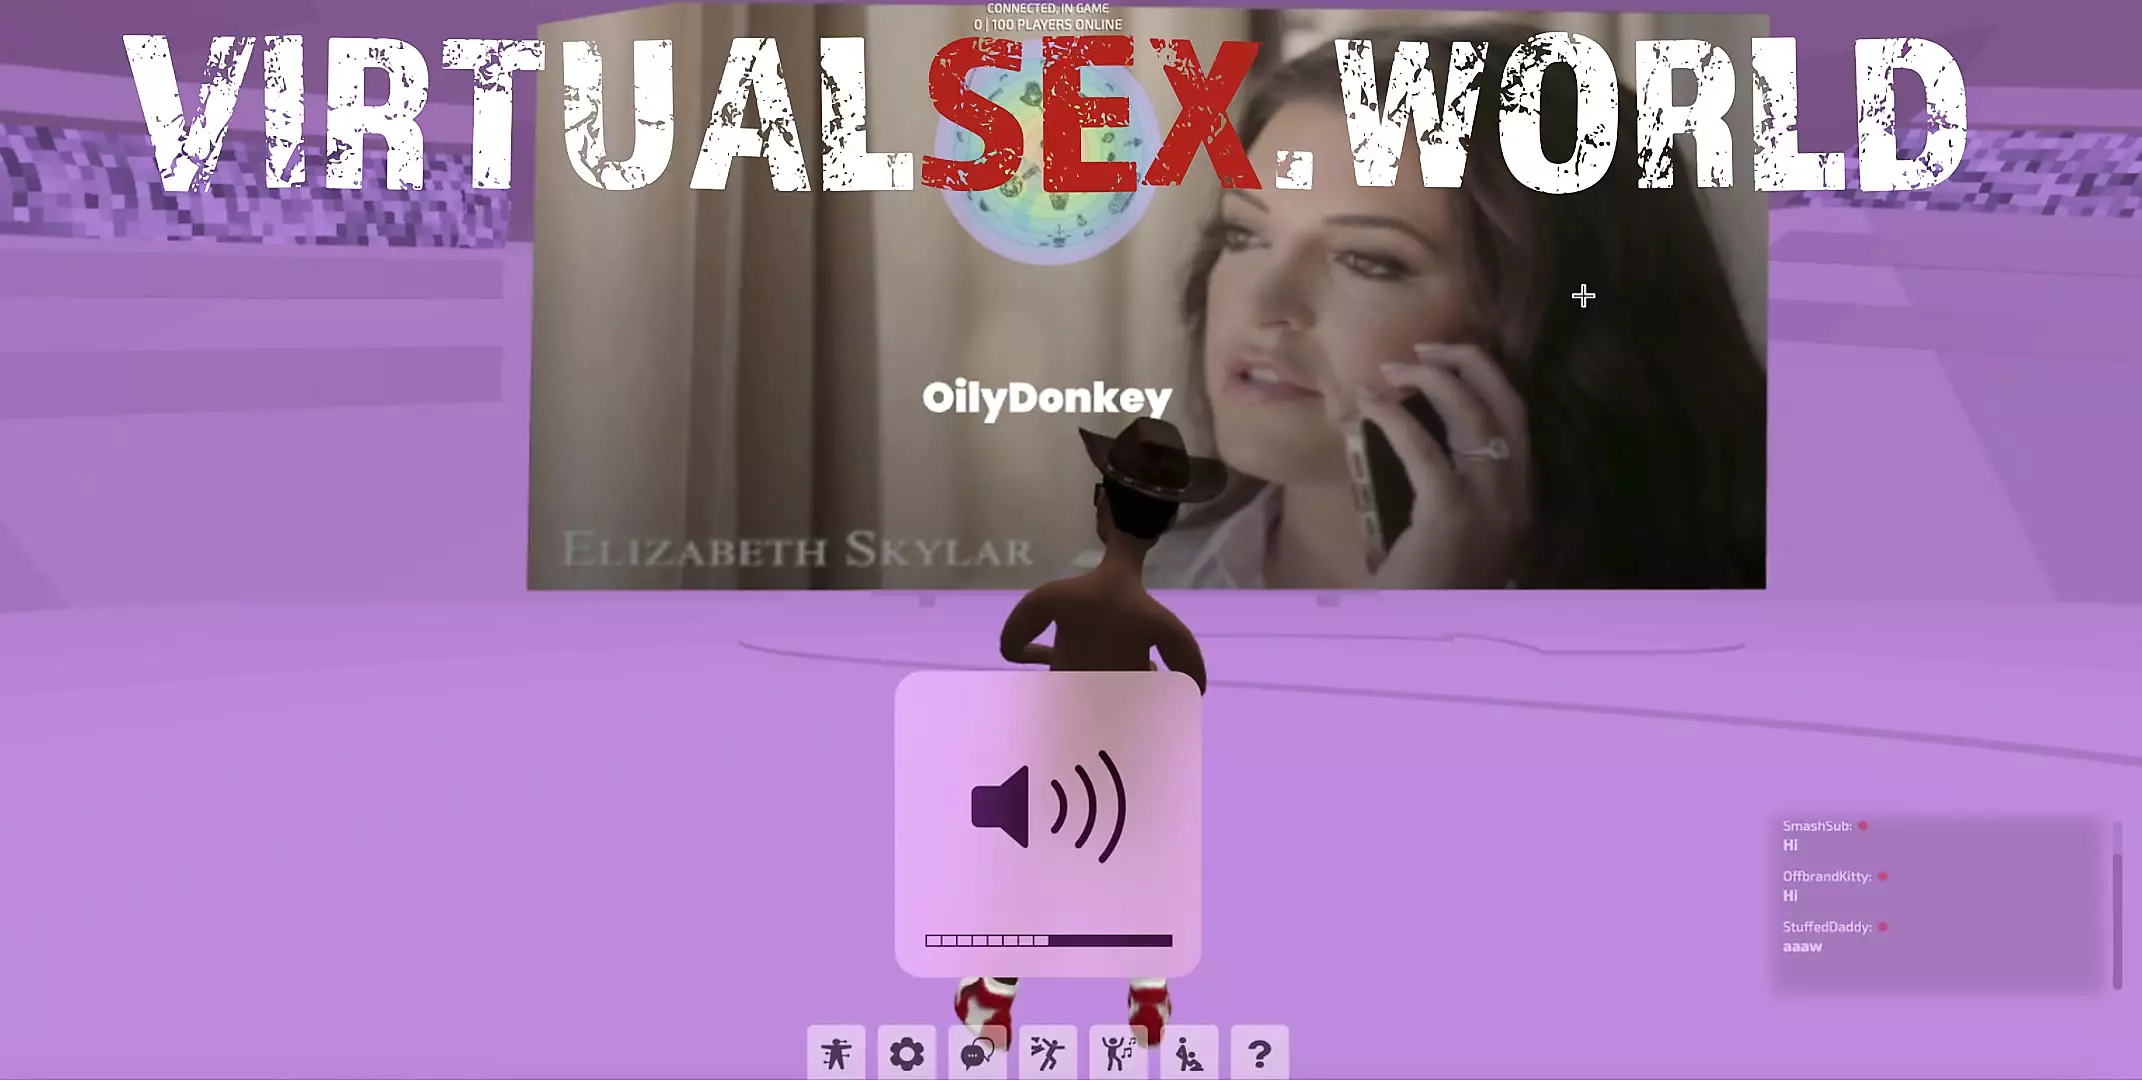 Running around Virtual Sex World to watch Elizabeth Skylar in Dirty Wives Club and Tonights Girlfriend picture photo